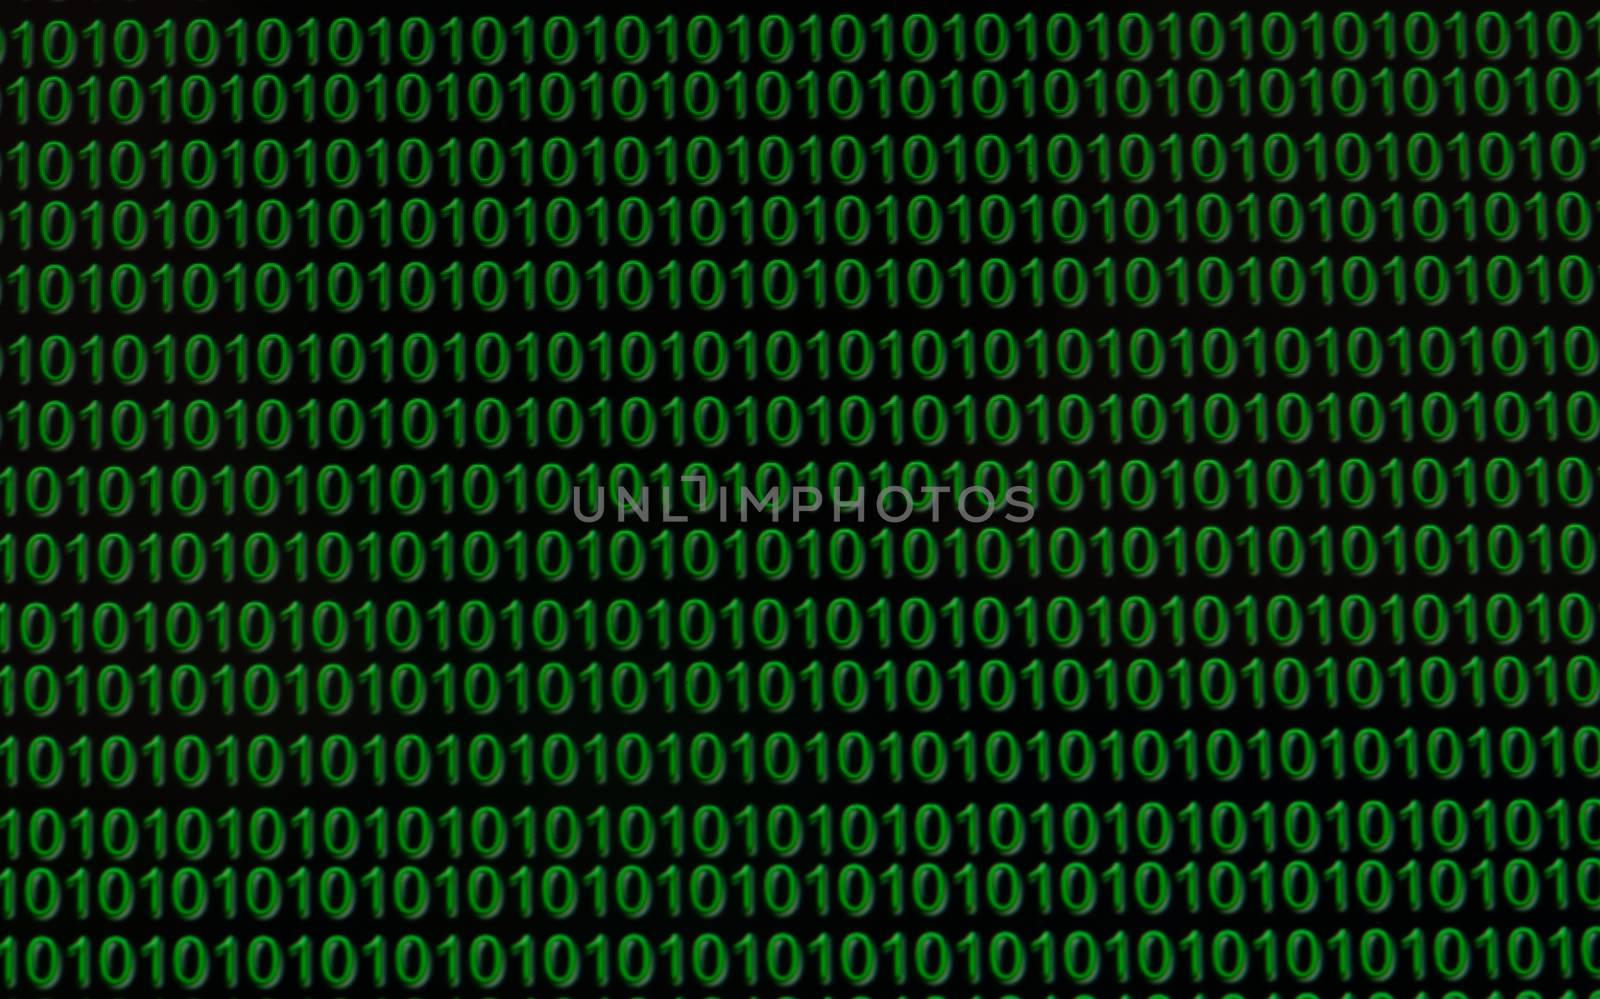 Green computer language binary numbers glow on black background. by noppha80